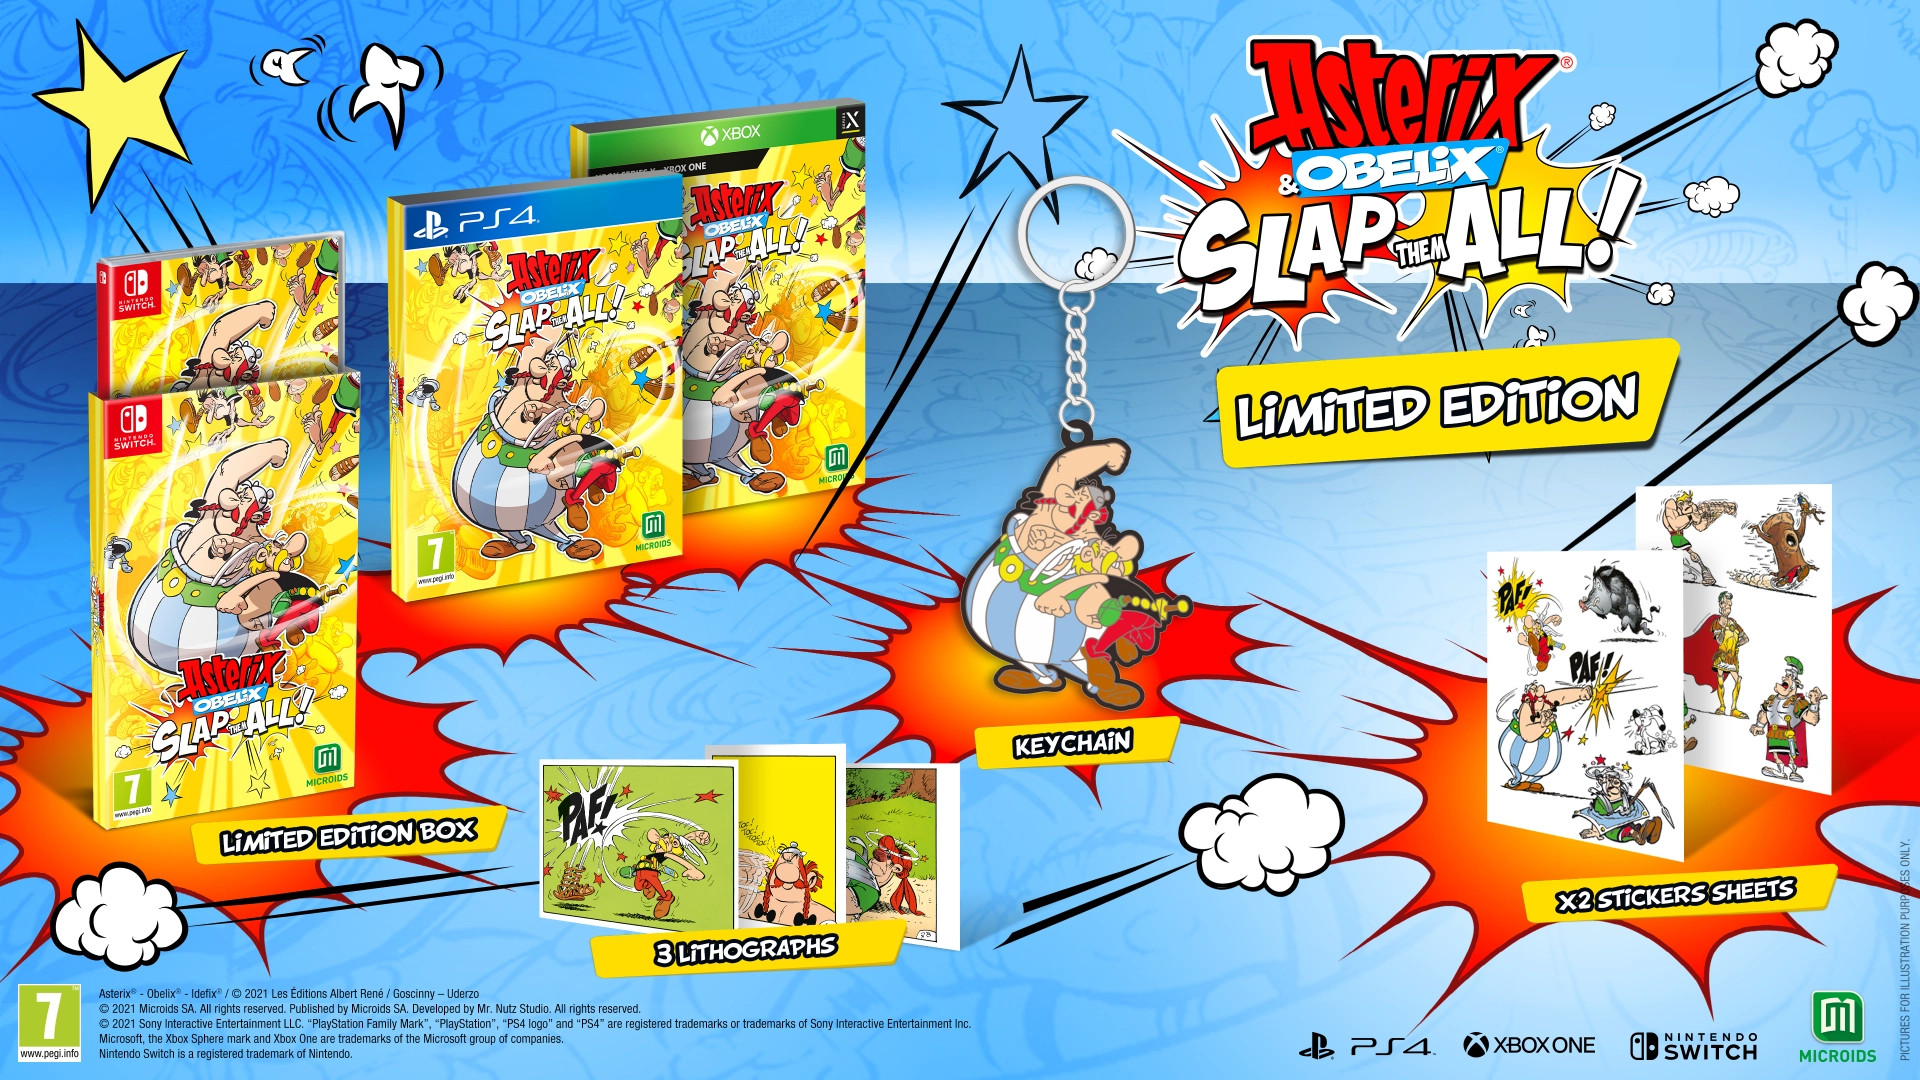 Asterix & Obelix: Slap Them All! Limited Edition - Nintendo Switch